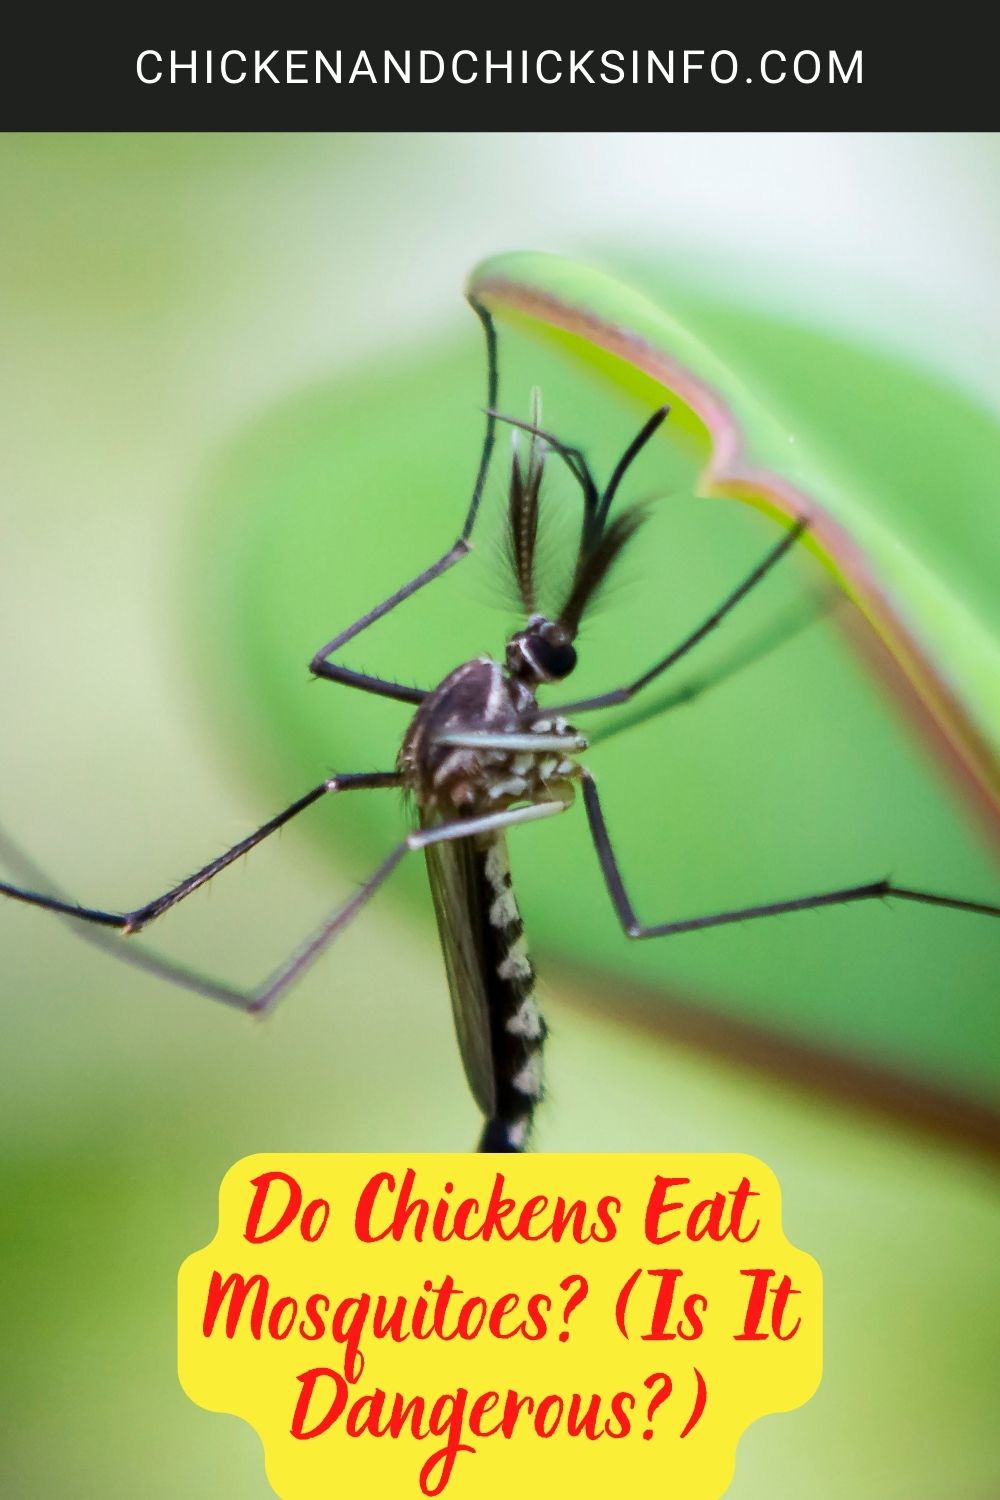 Do Chickens Eat Mosquitoes? (Is It Dangerous?) poster.
